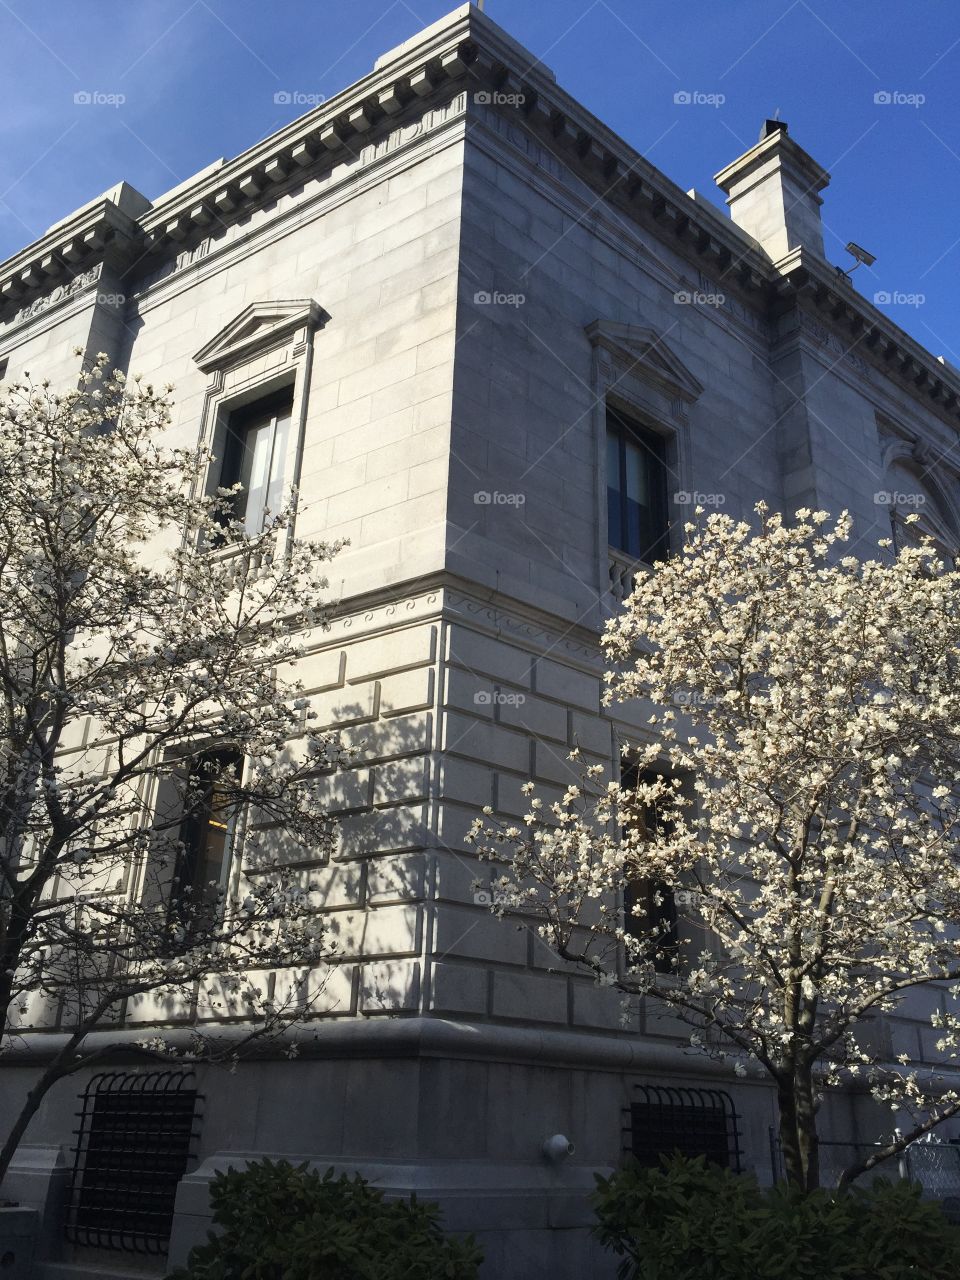 Federal courthouse spring blossoms 